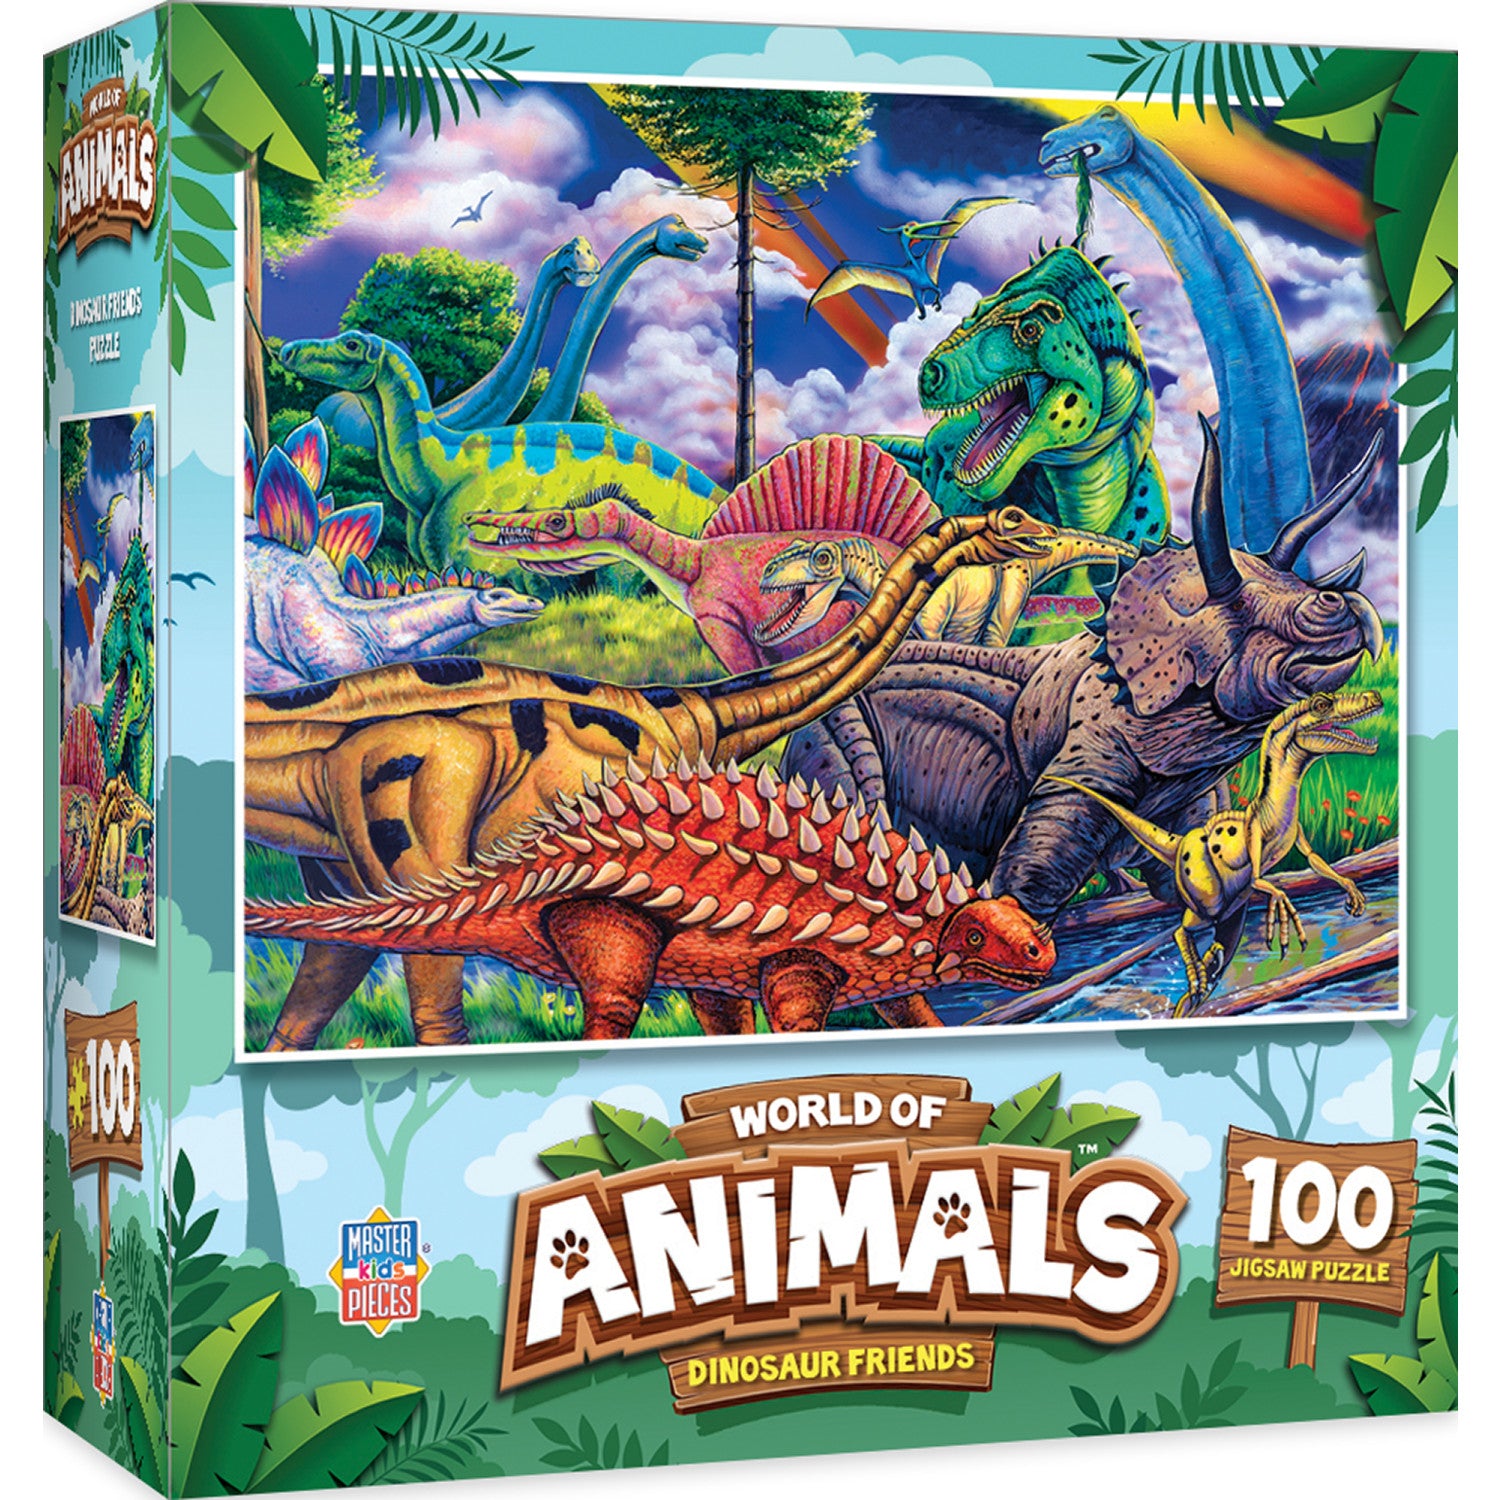 MasterPieces Puzzle Set - 4-Pack 100 Piece Jigsaw Puzzle for Kids -  Caterpillar 4-Pack - 8x10